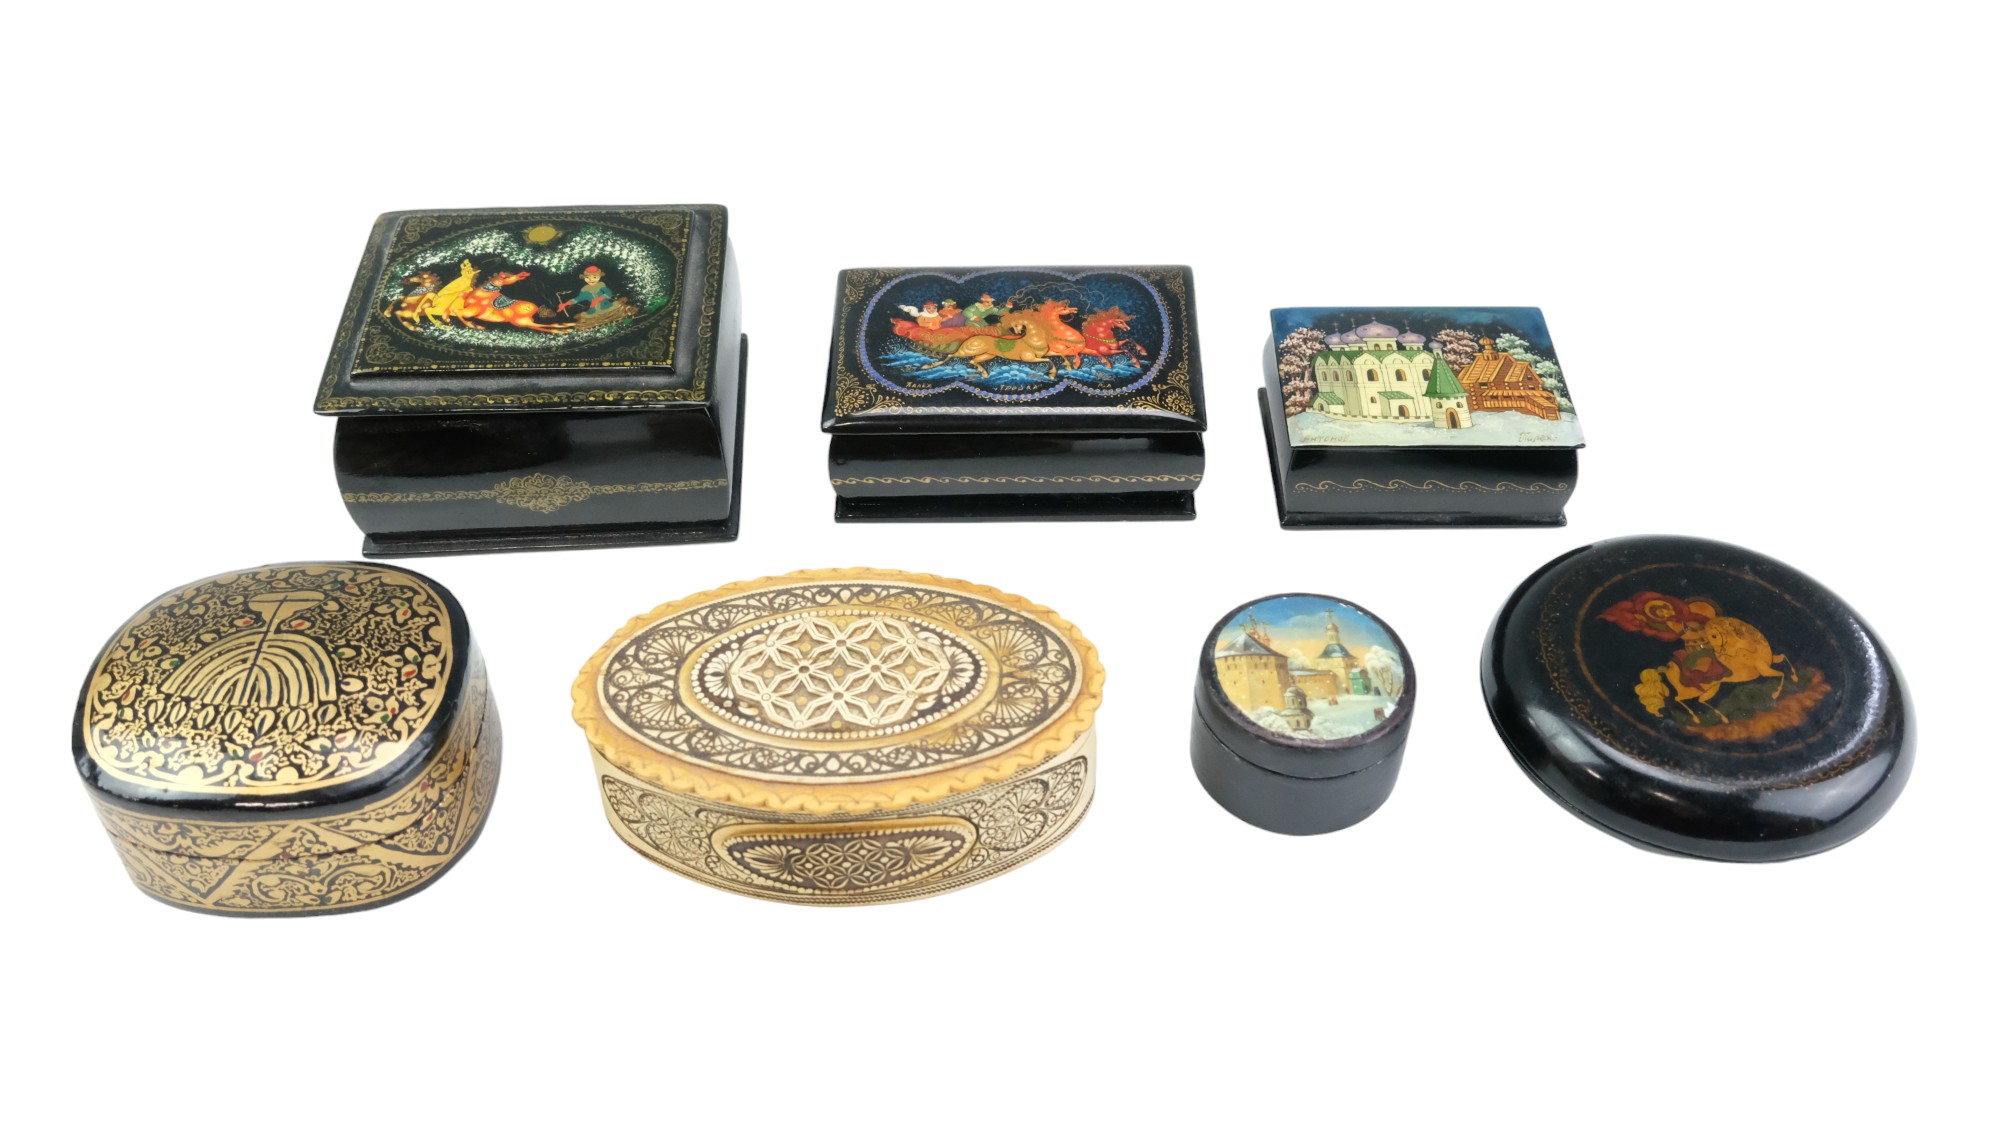 Late 20th Century Russian Palekh lacquered mache boxes together with a similar box gilt-decorated